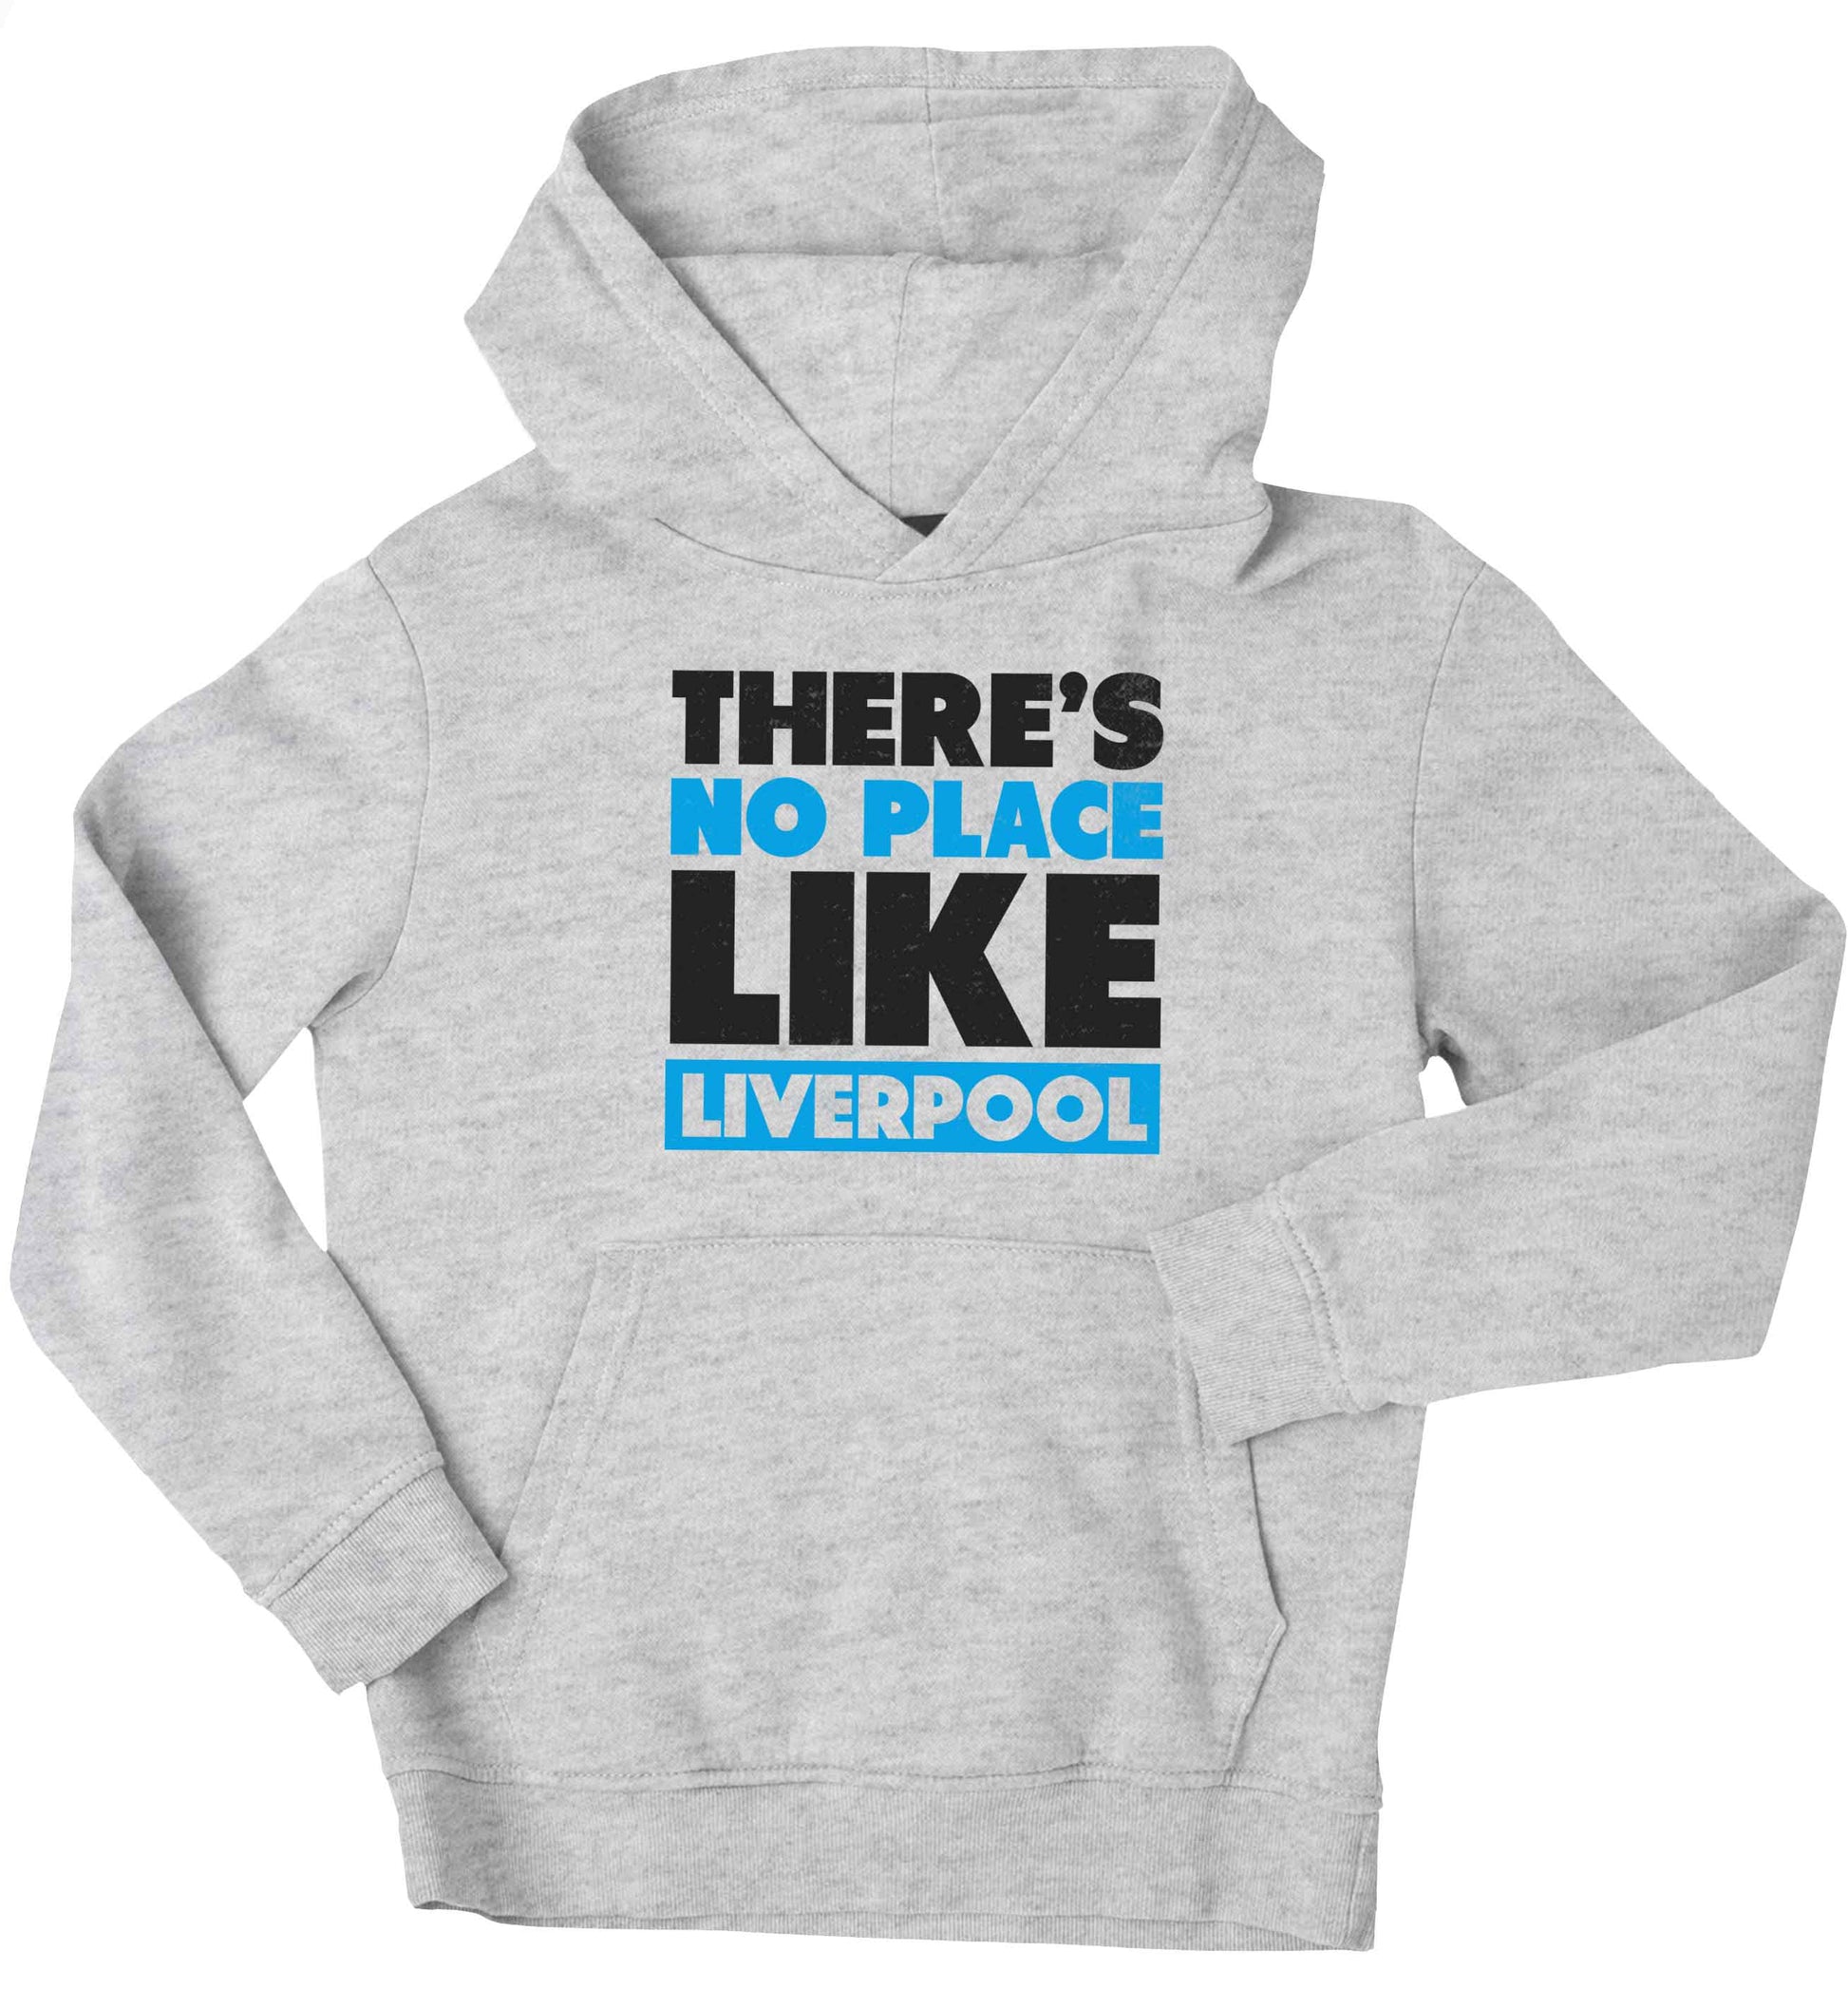 There's no place like Liverpool children's grey hoodie 12-13 Years